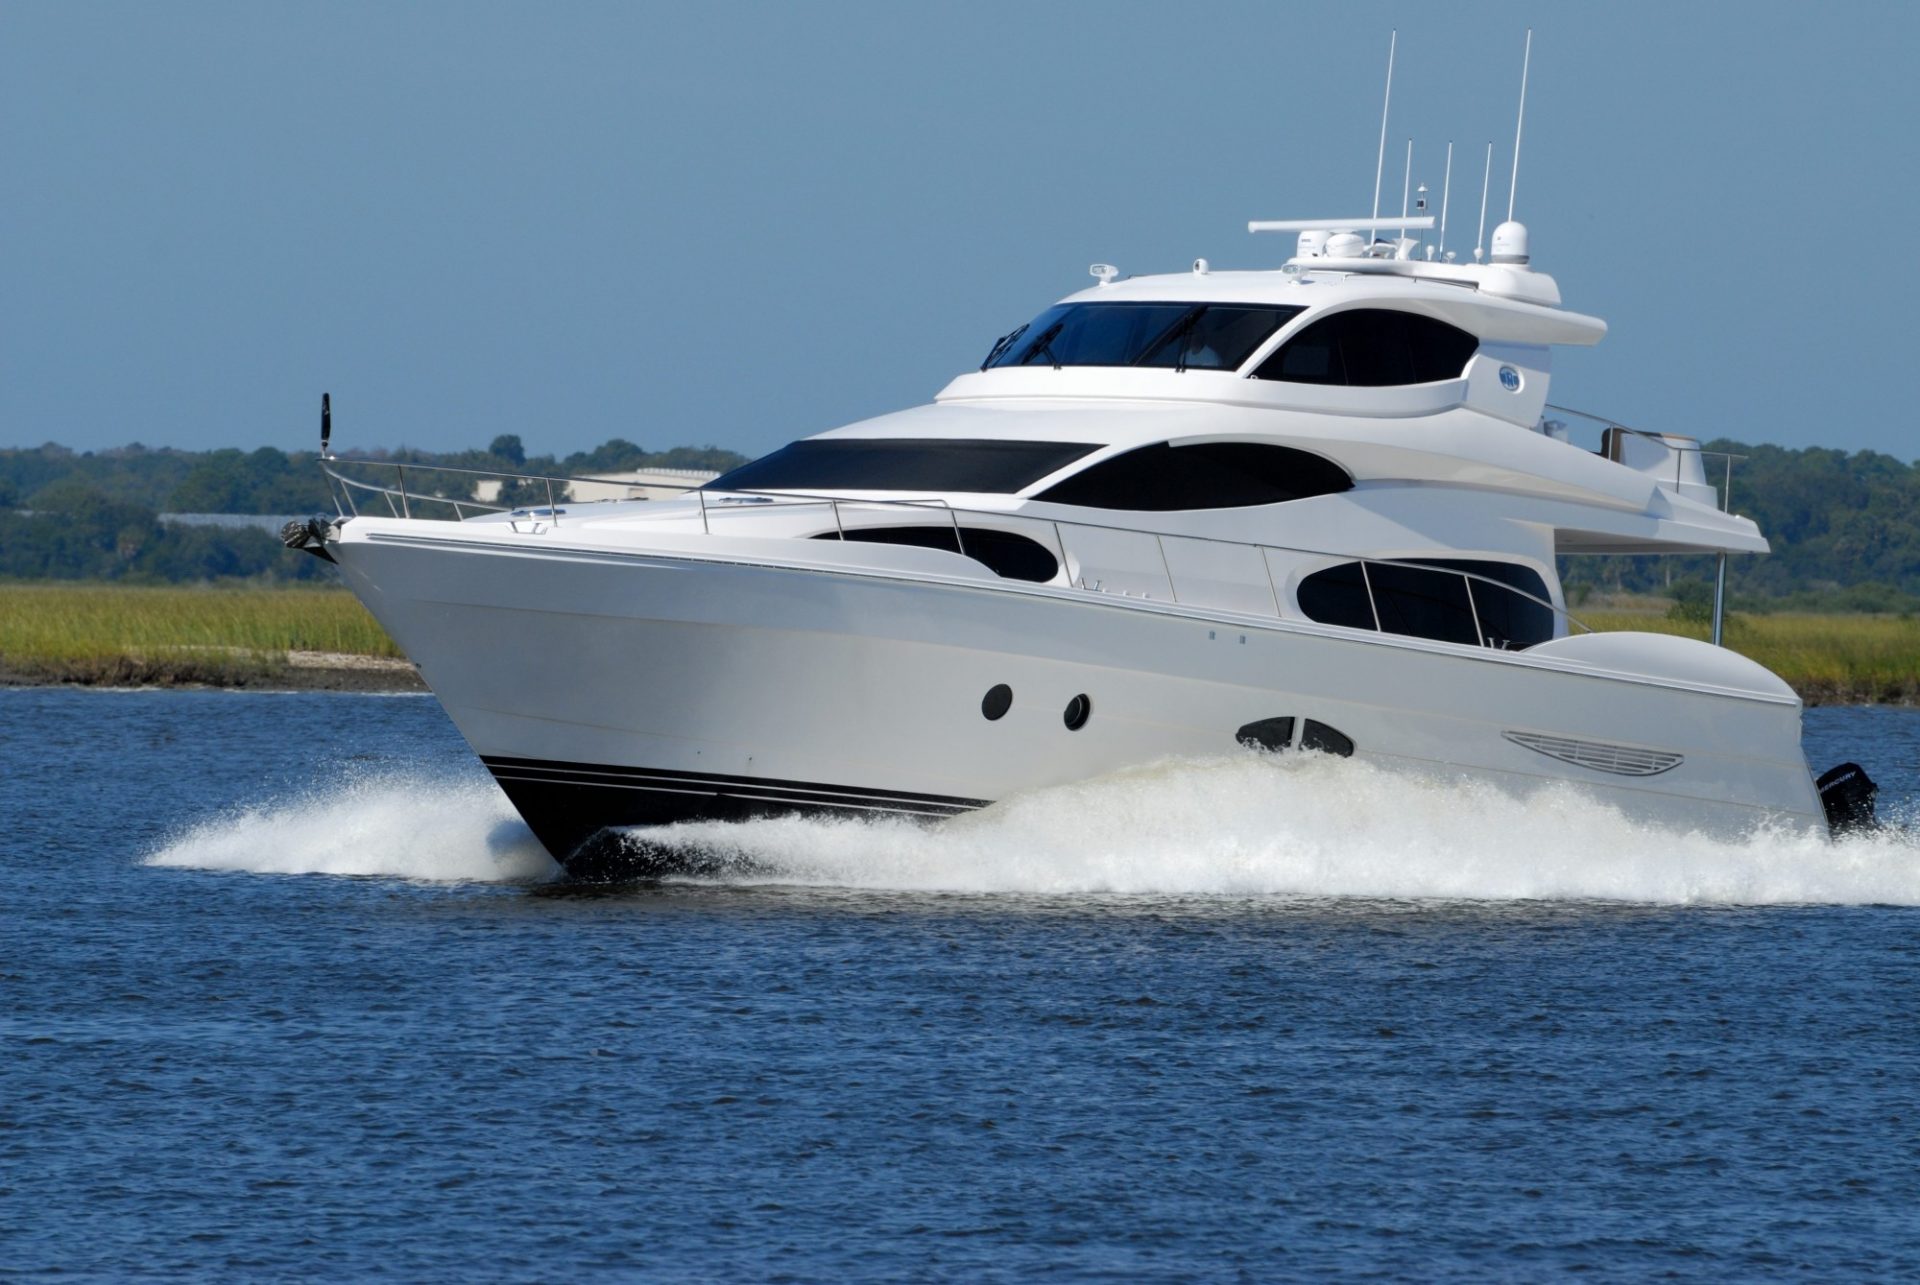 Top 5 Fun Things to Do on Yachts